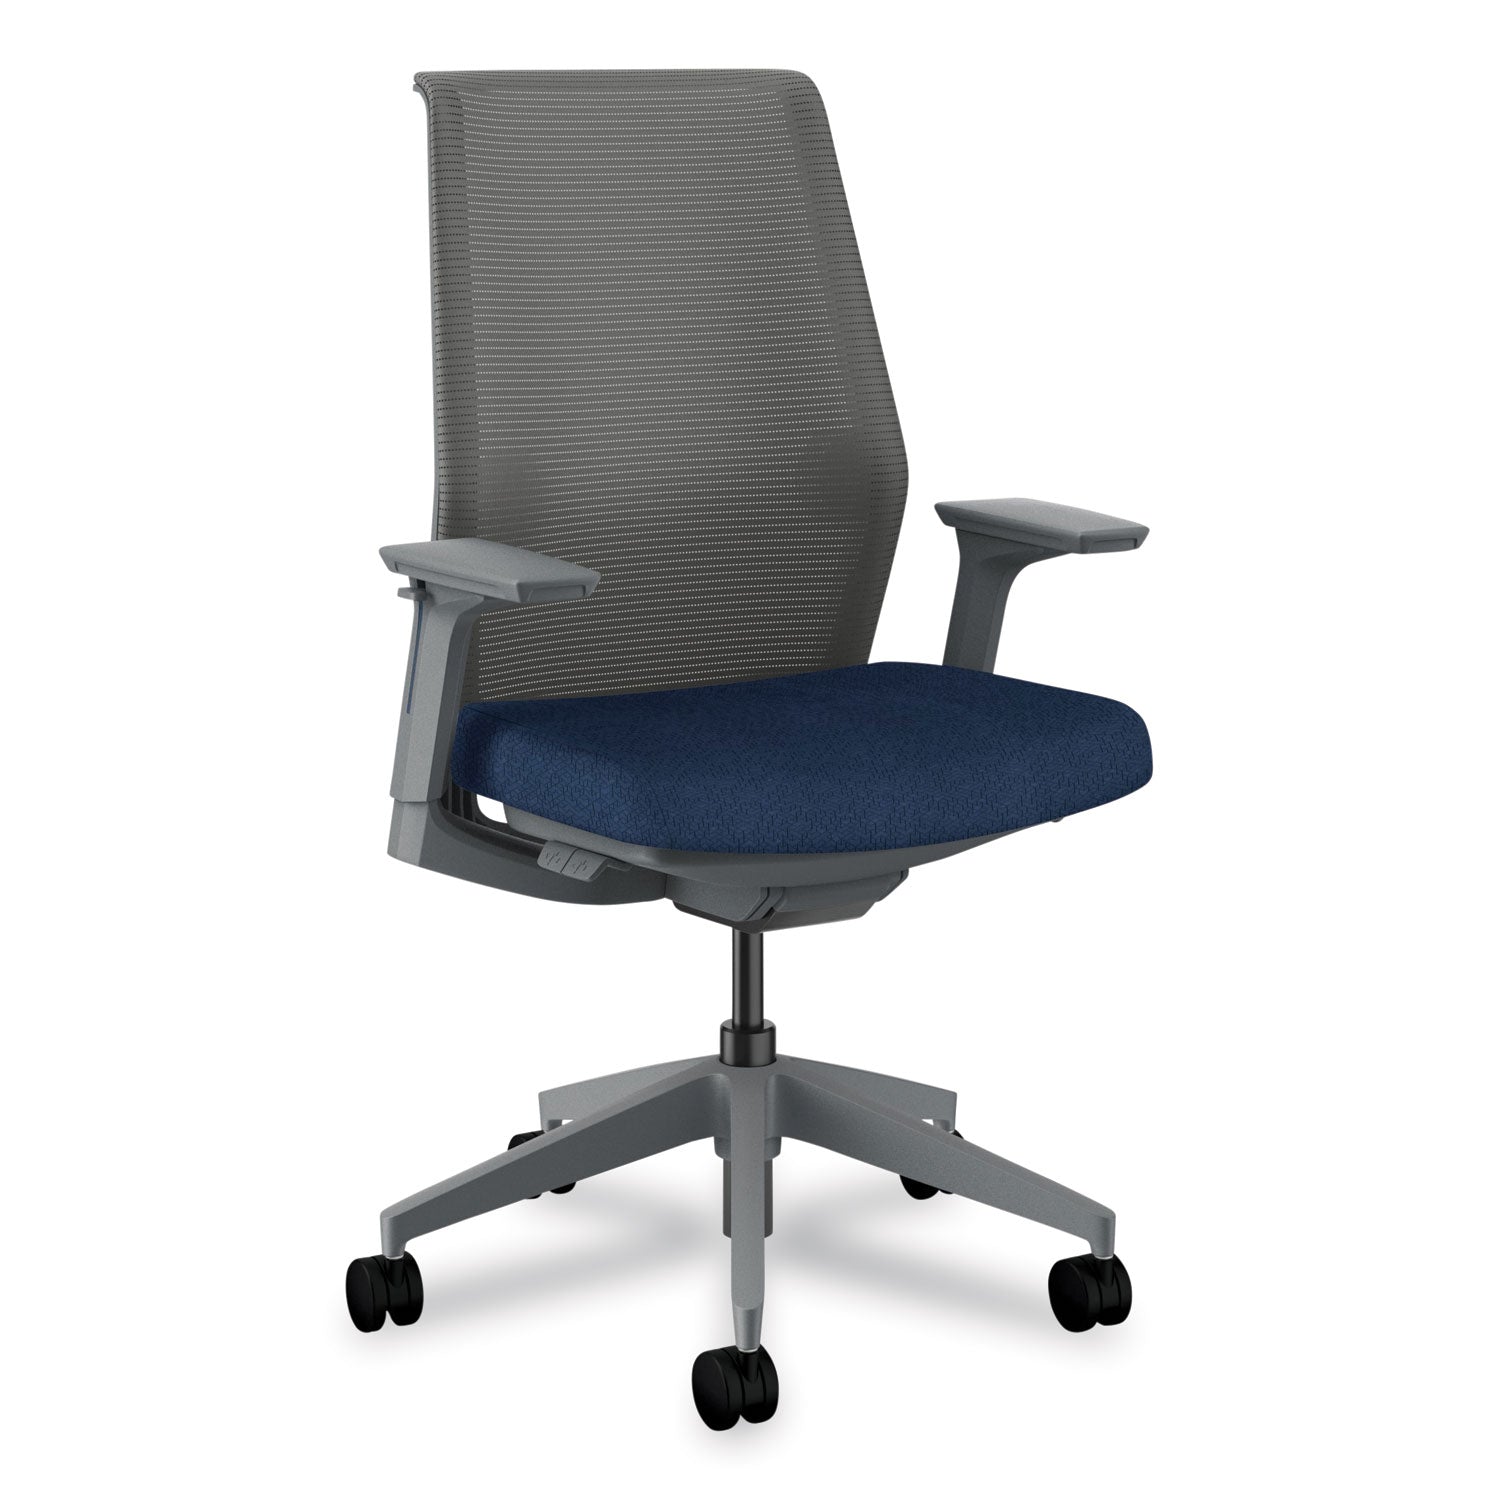 cipher-mesh-back-task-chair-supports-300-lb-15-to-20-seat-height-navy-seat-charcoal-back-base-ships-in-7-10-bus-days_honcrthsca13lrs - 1